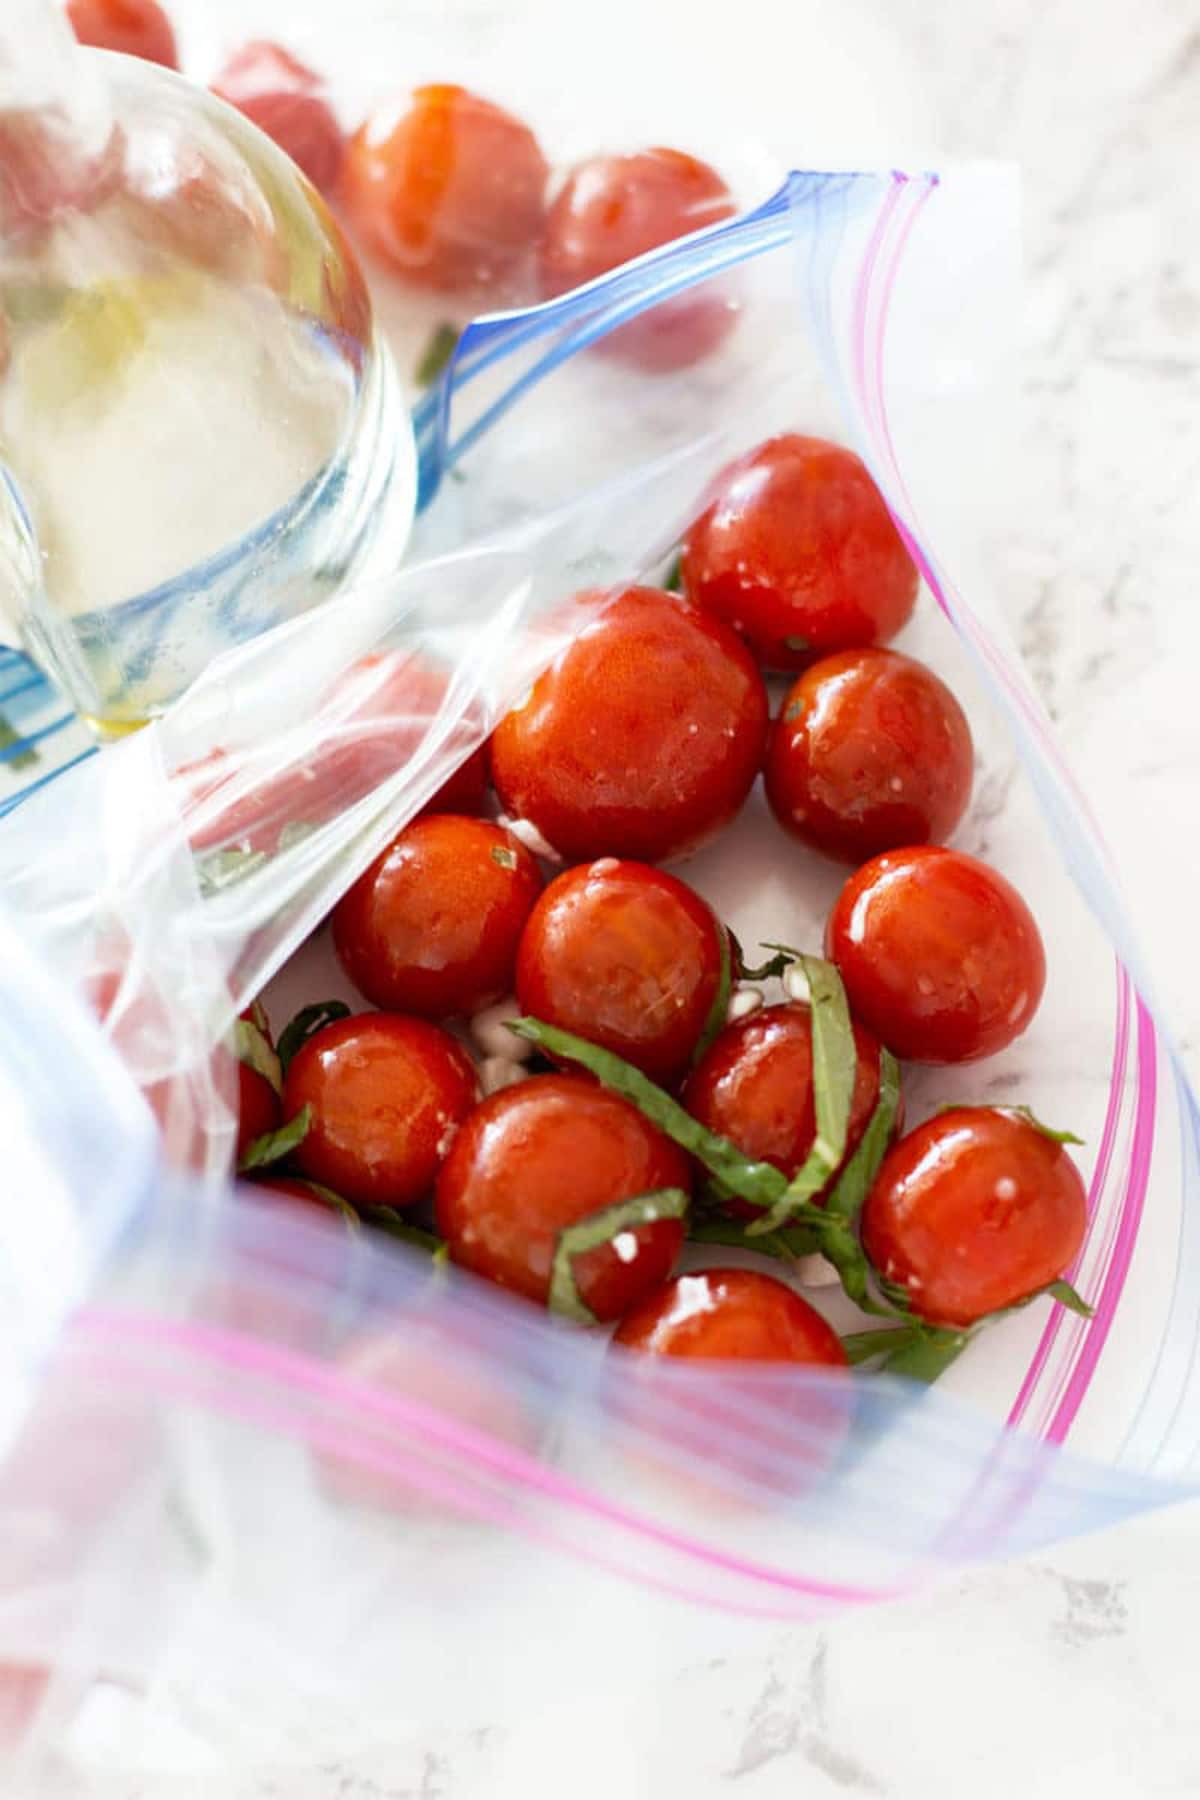 Plastic bag filled with olive oil, basil, and fresh cherry tomatoes.